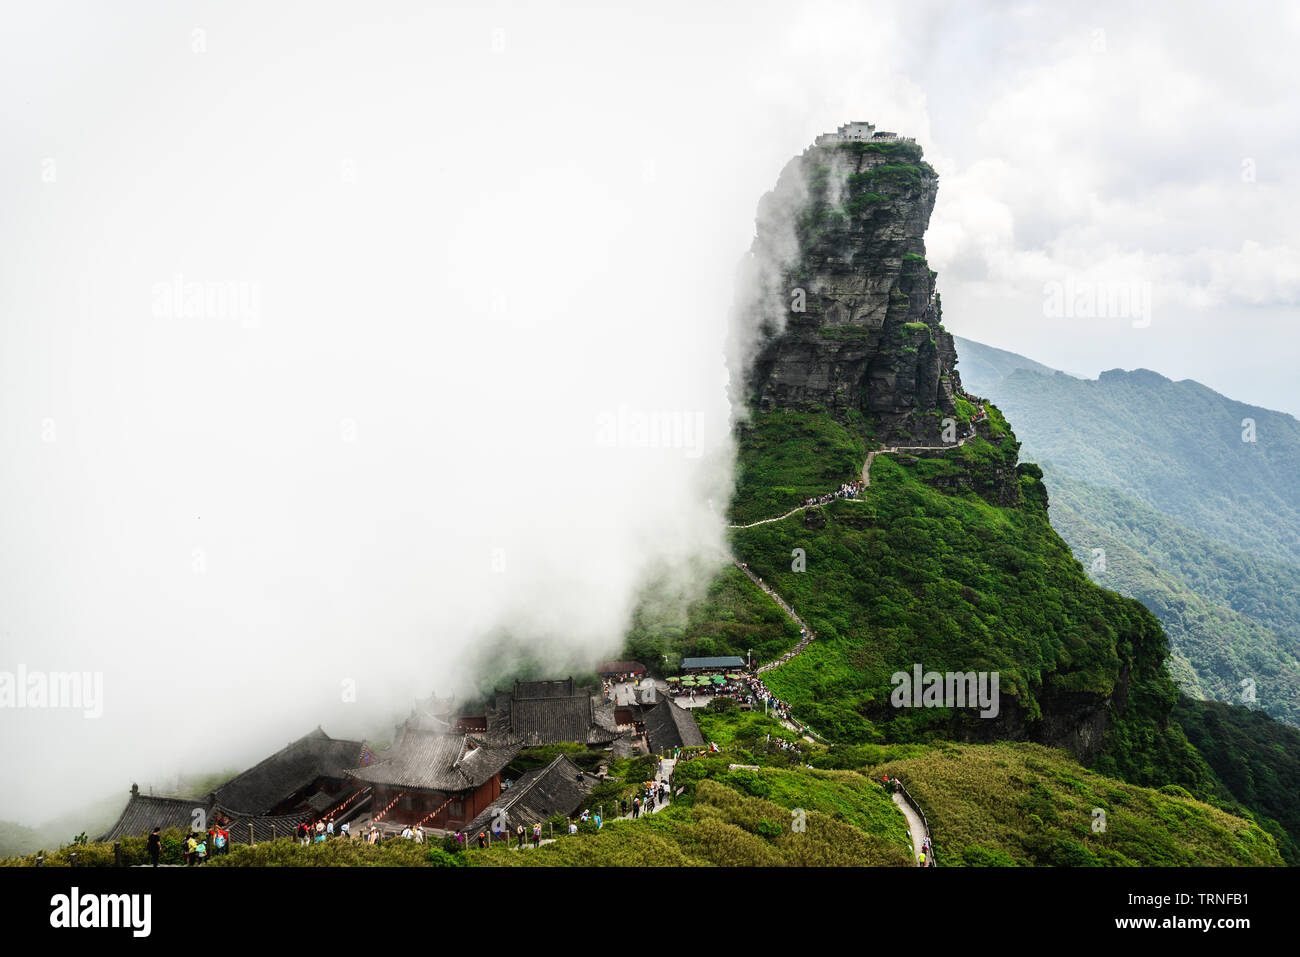 Fanjingshan mountain scenery with view of the new golden summit with Buddhist temple on the top in the clouds in Guizhou China Stock Photo